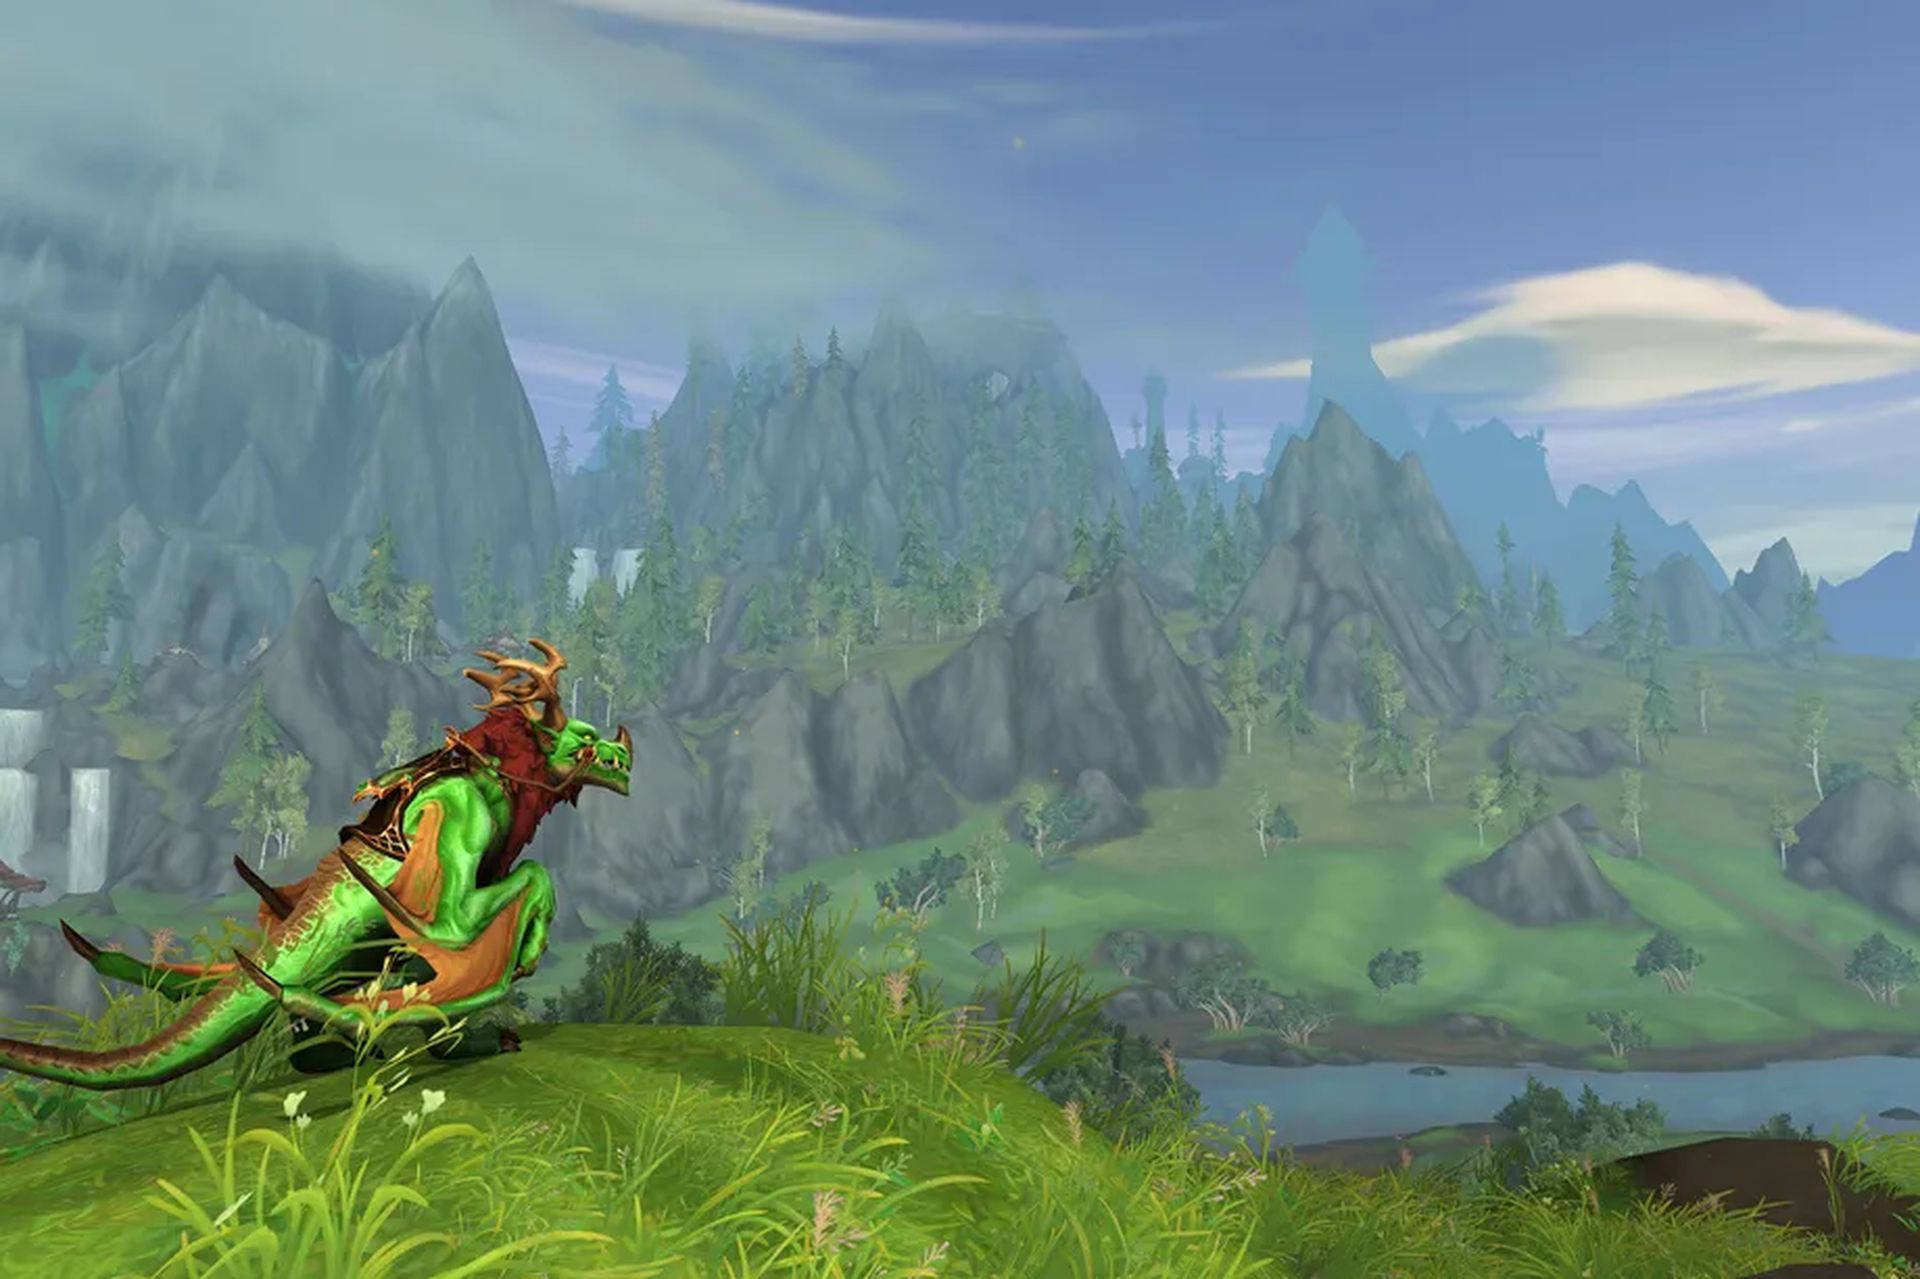 Why World of Warcraft is so popular - 5 reasons